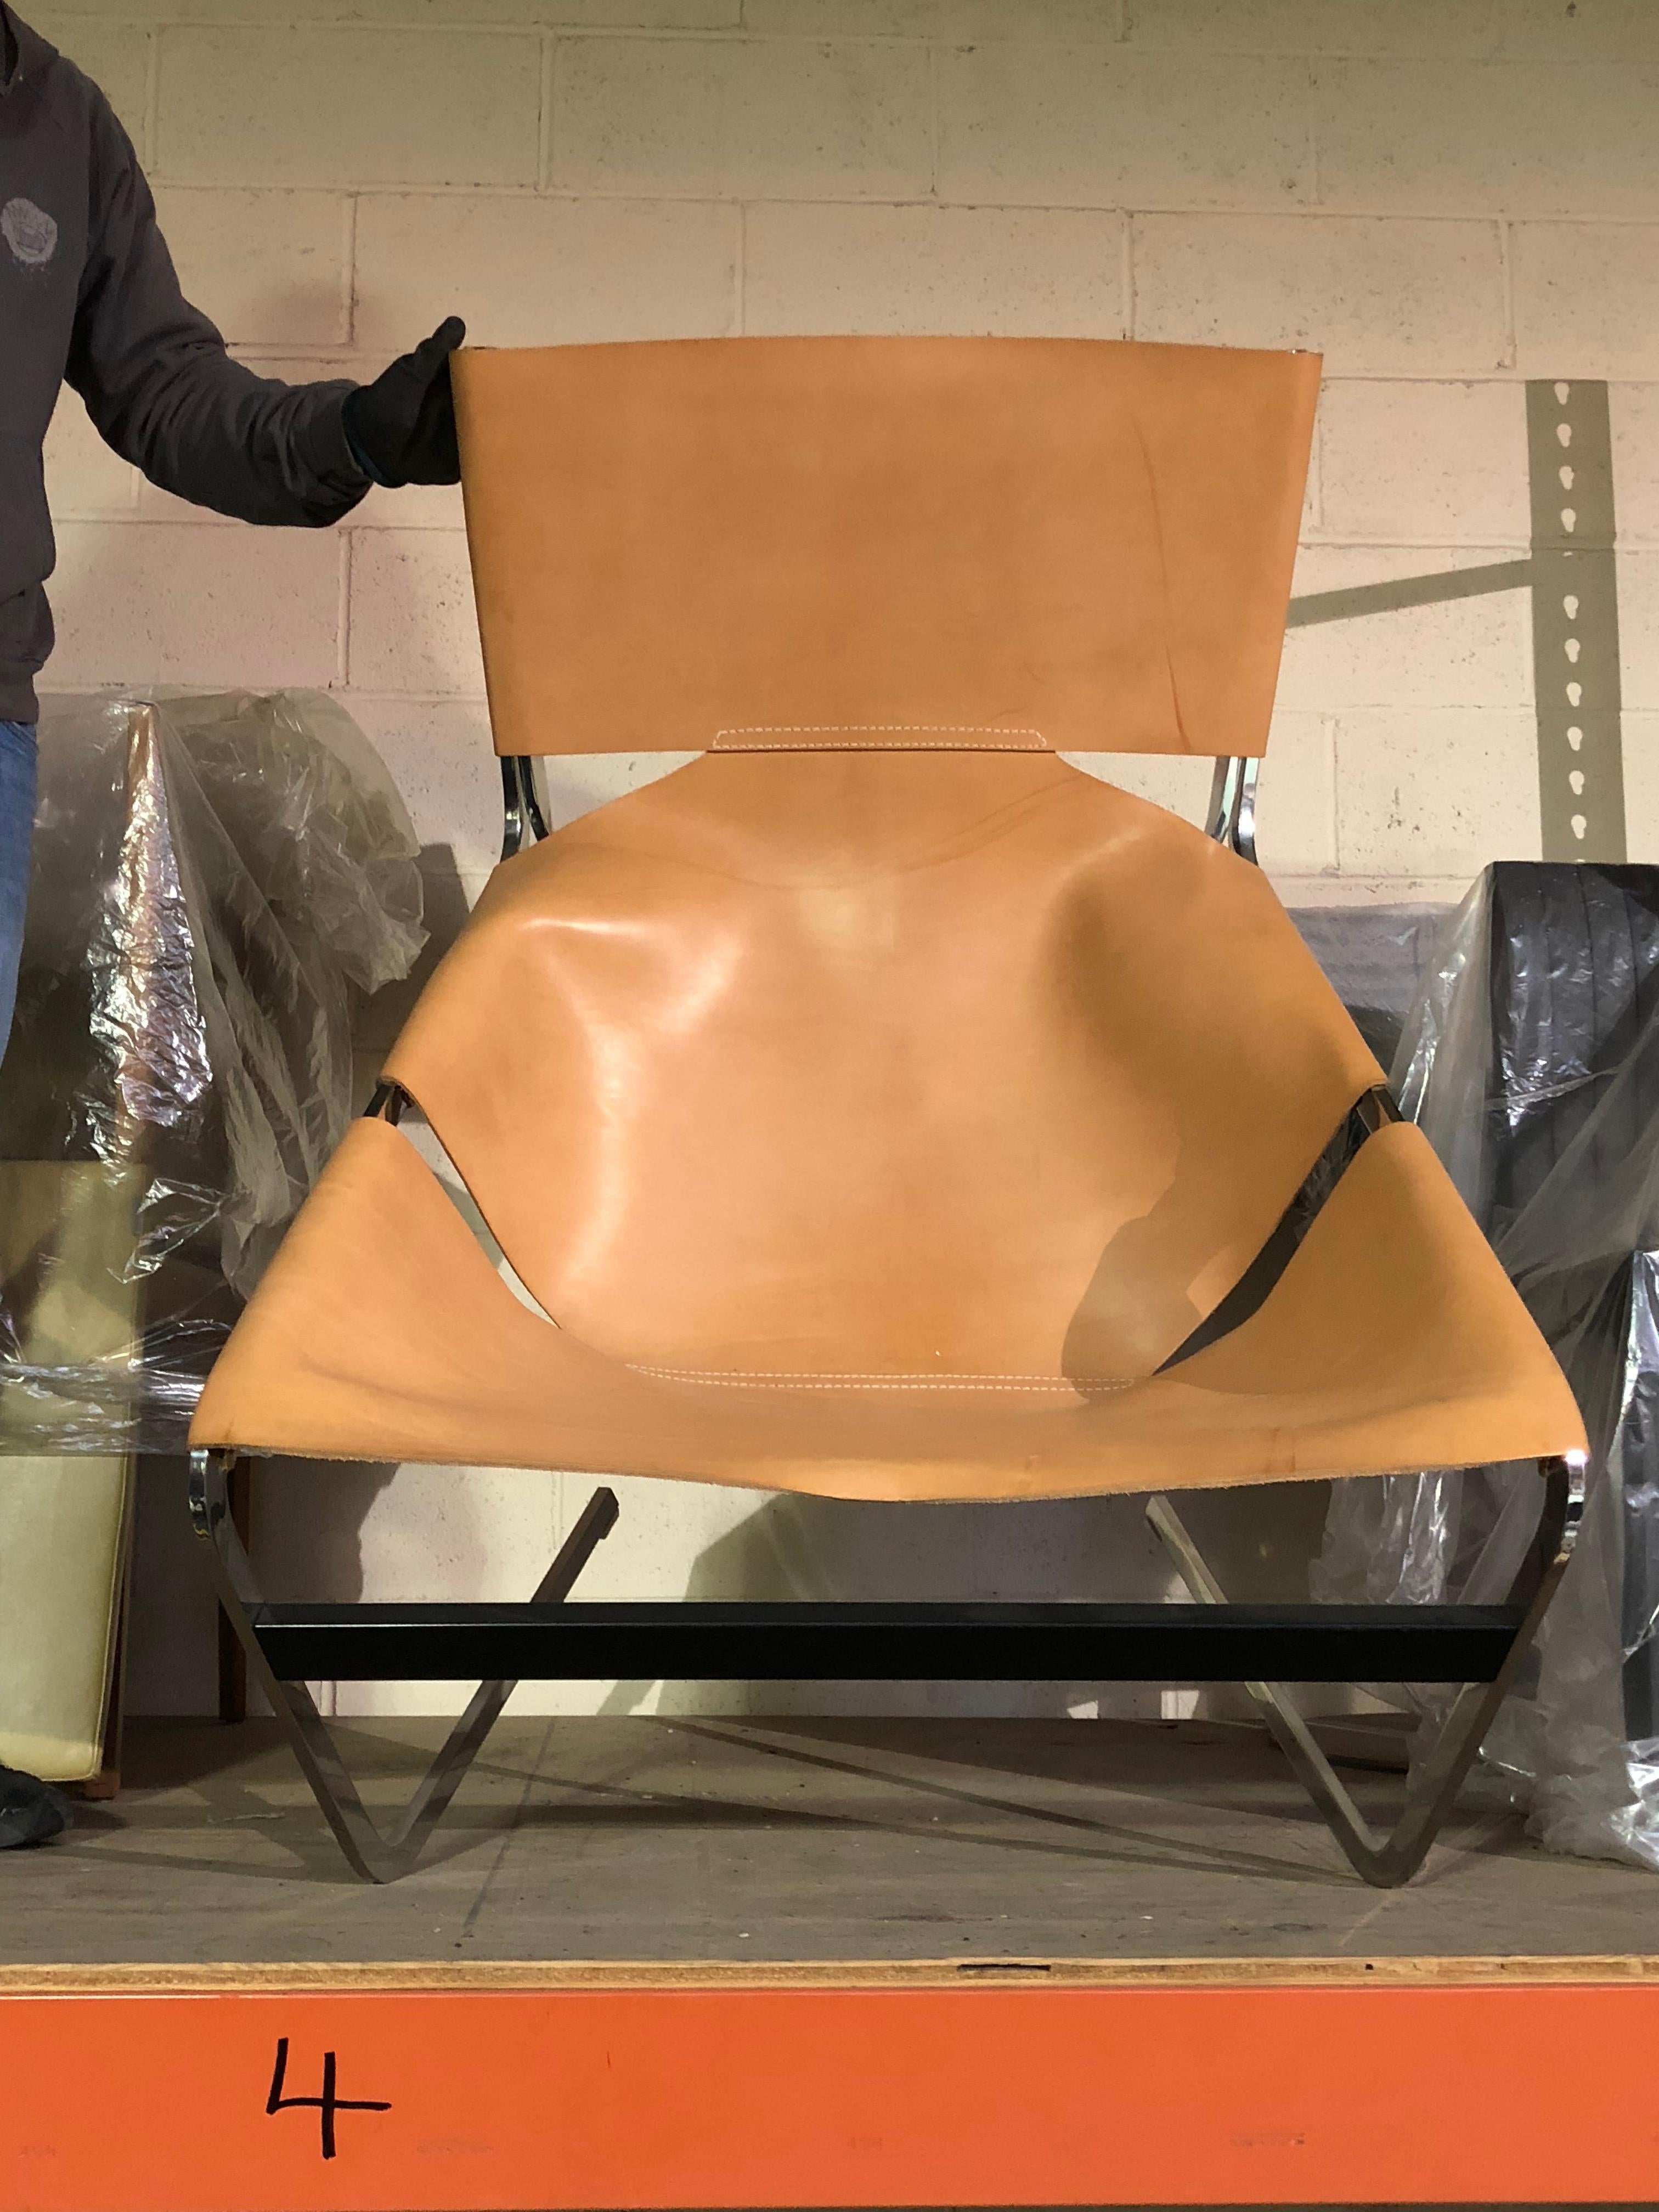 The F444 is Pierre Paulin’s design icon and dates back to 1963. It is one of the most representative designs of the revolutionary 1960s. This unique fauteuil, constructed from stainless steel and saddle Natural leather is sure to find a place in the